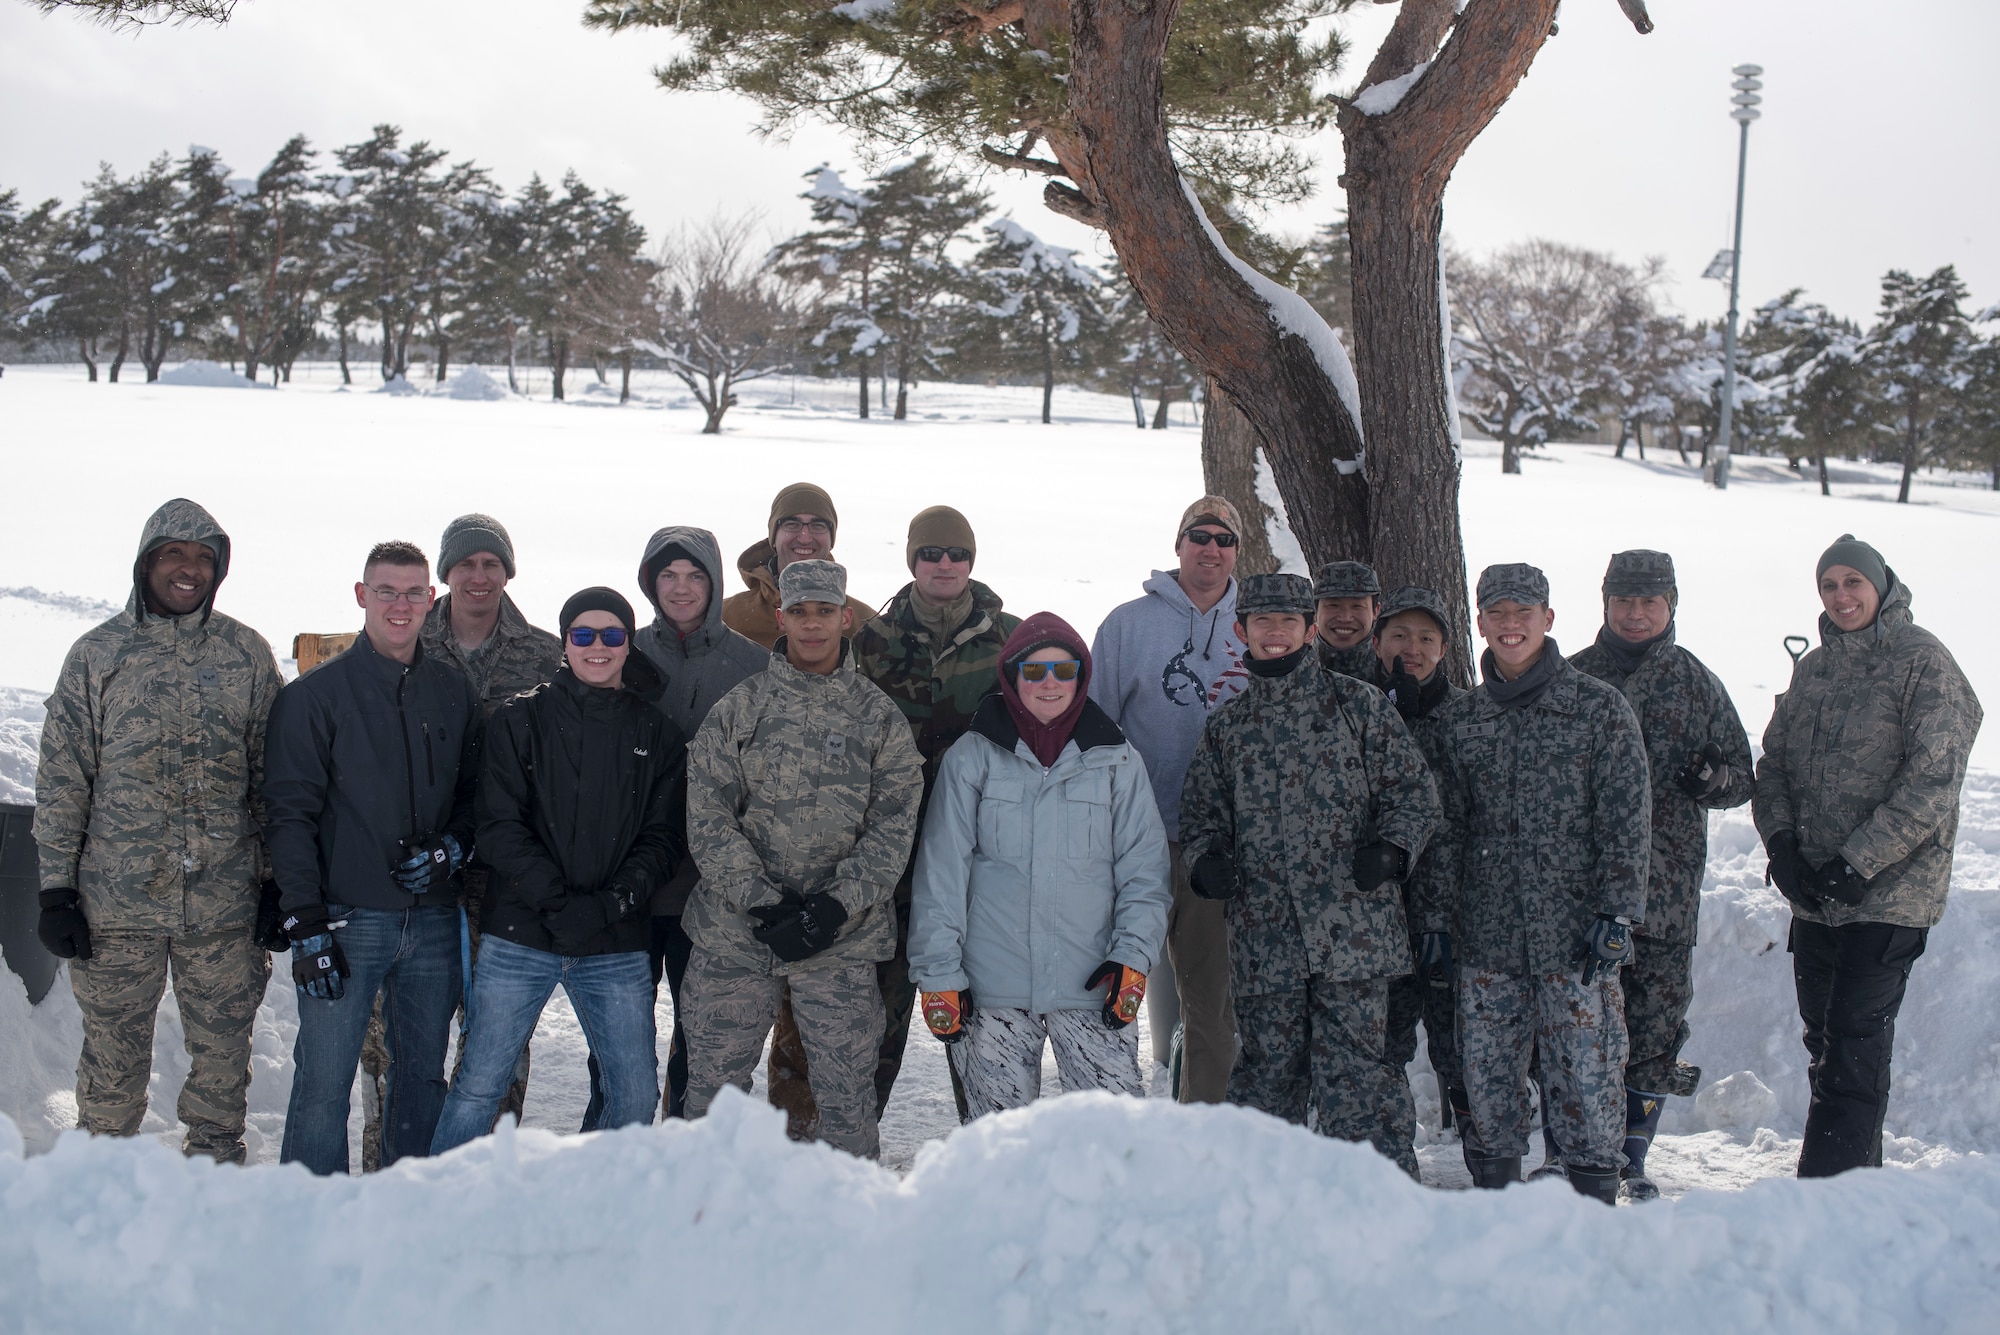 U.S. Air Force Airmen with the 35th Civil Engineer Squadron emergency management flight and Japan Air Self-Defense Force members pause for a photo during the inaugural “Snowblast” event at Misawa Air Base, Japan, Feb. 14, 2019. The emergency flight gathered for a snowball fight and capture the flag events with members of JASDF. This event provided an opportunity for Airmen to bond with their host-nation counterparts. (U.S. Air Force photo by 1st Lt. Jeremy Garcia).